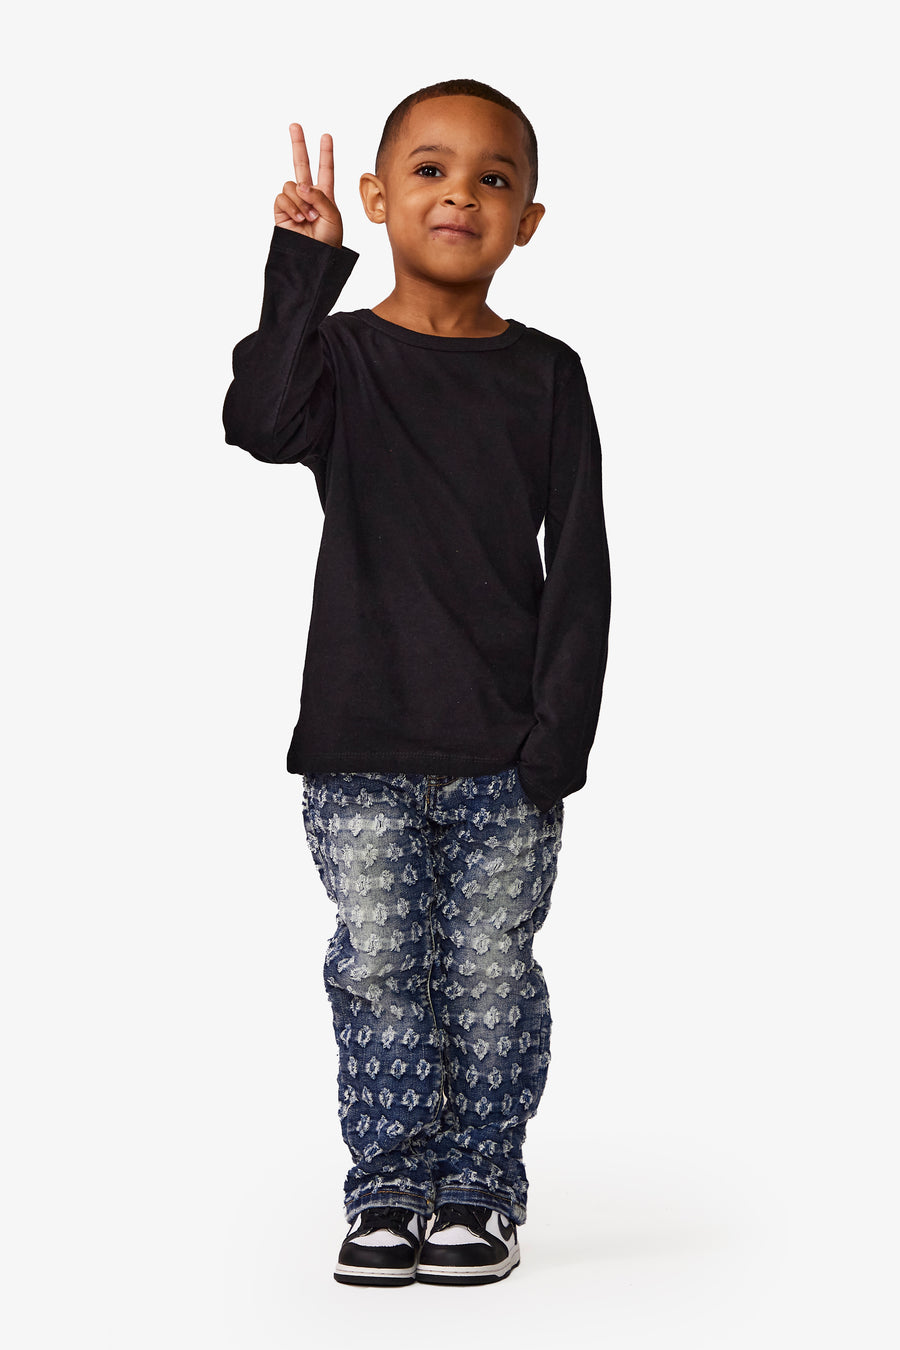 VPLAY KIDS JEANS "REPEAT" BLUE WASHED